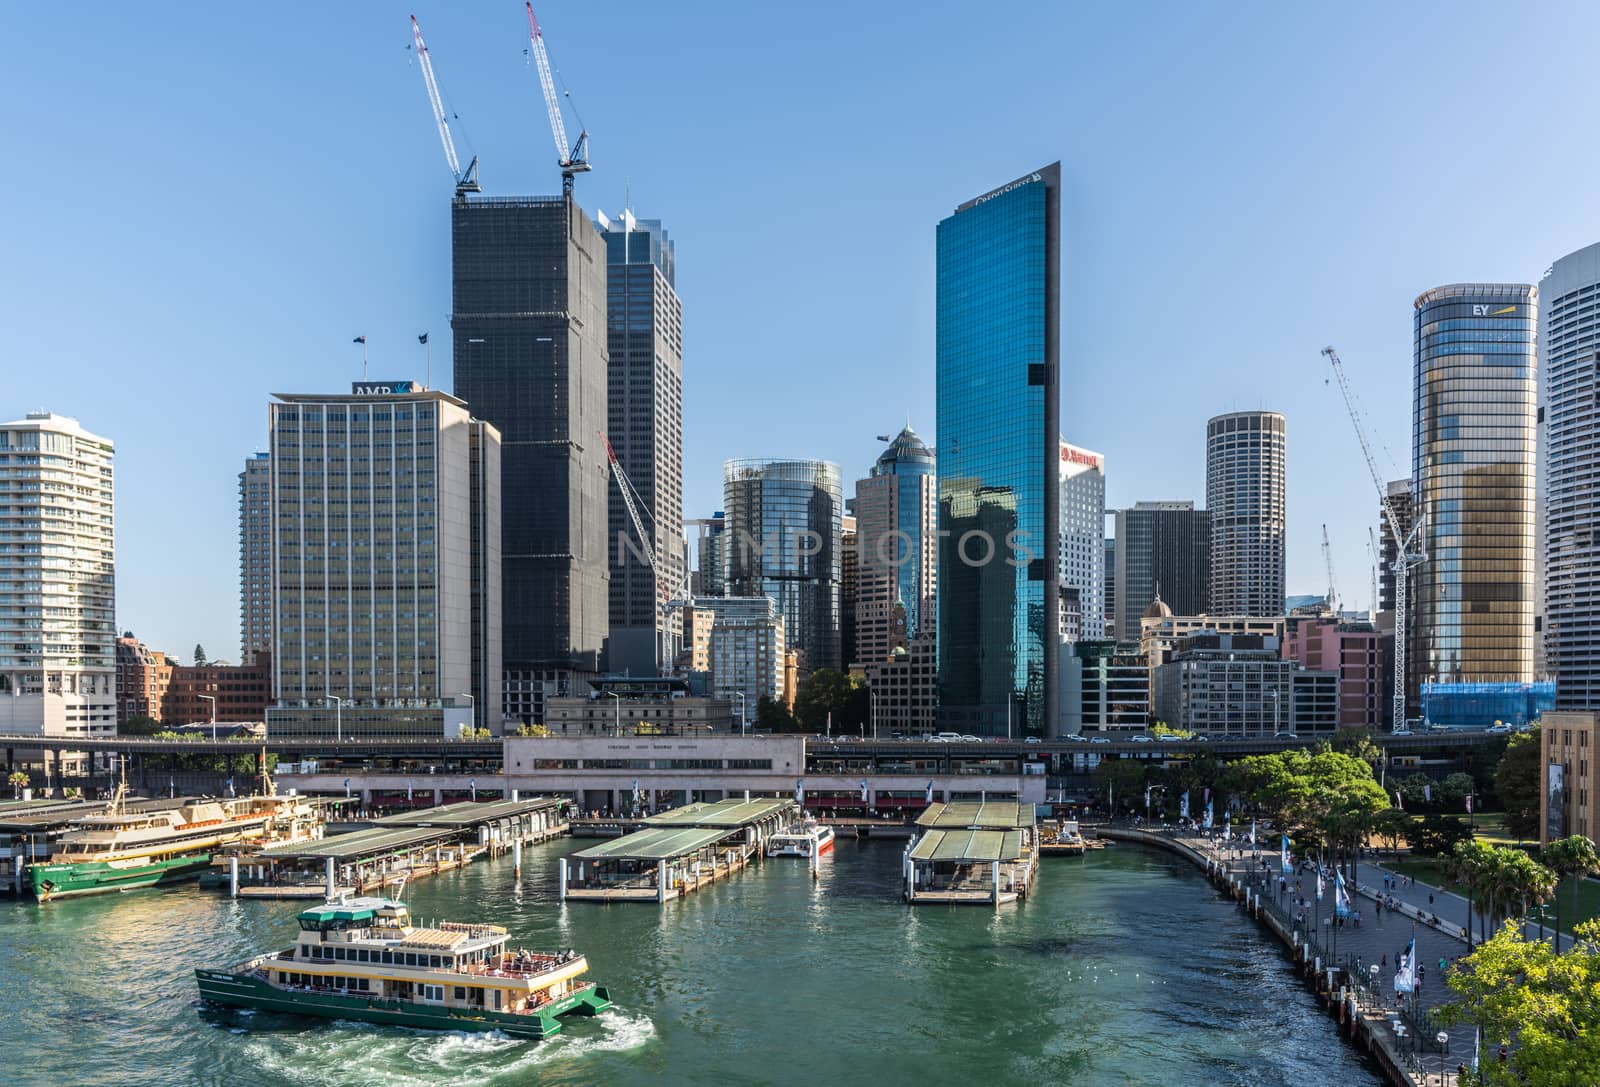 Ferry terminal and Circular Quay Railway station, Sydney Austral by Claudine